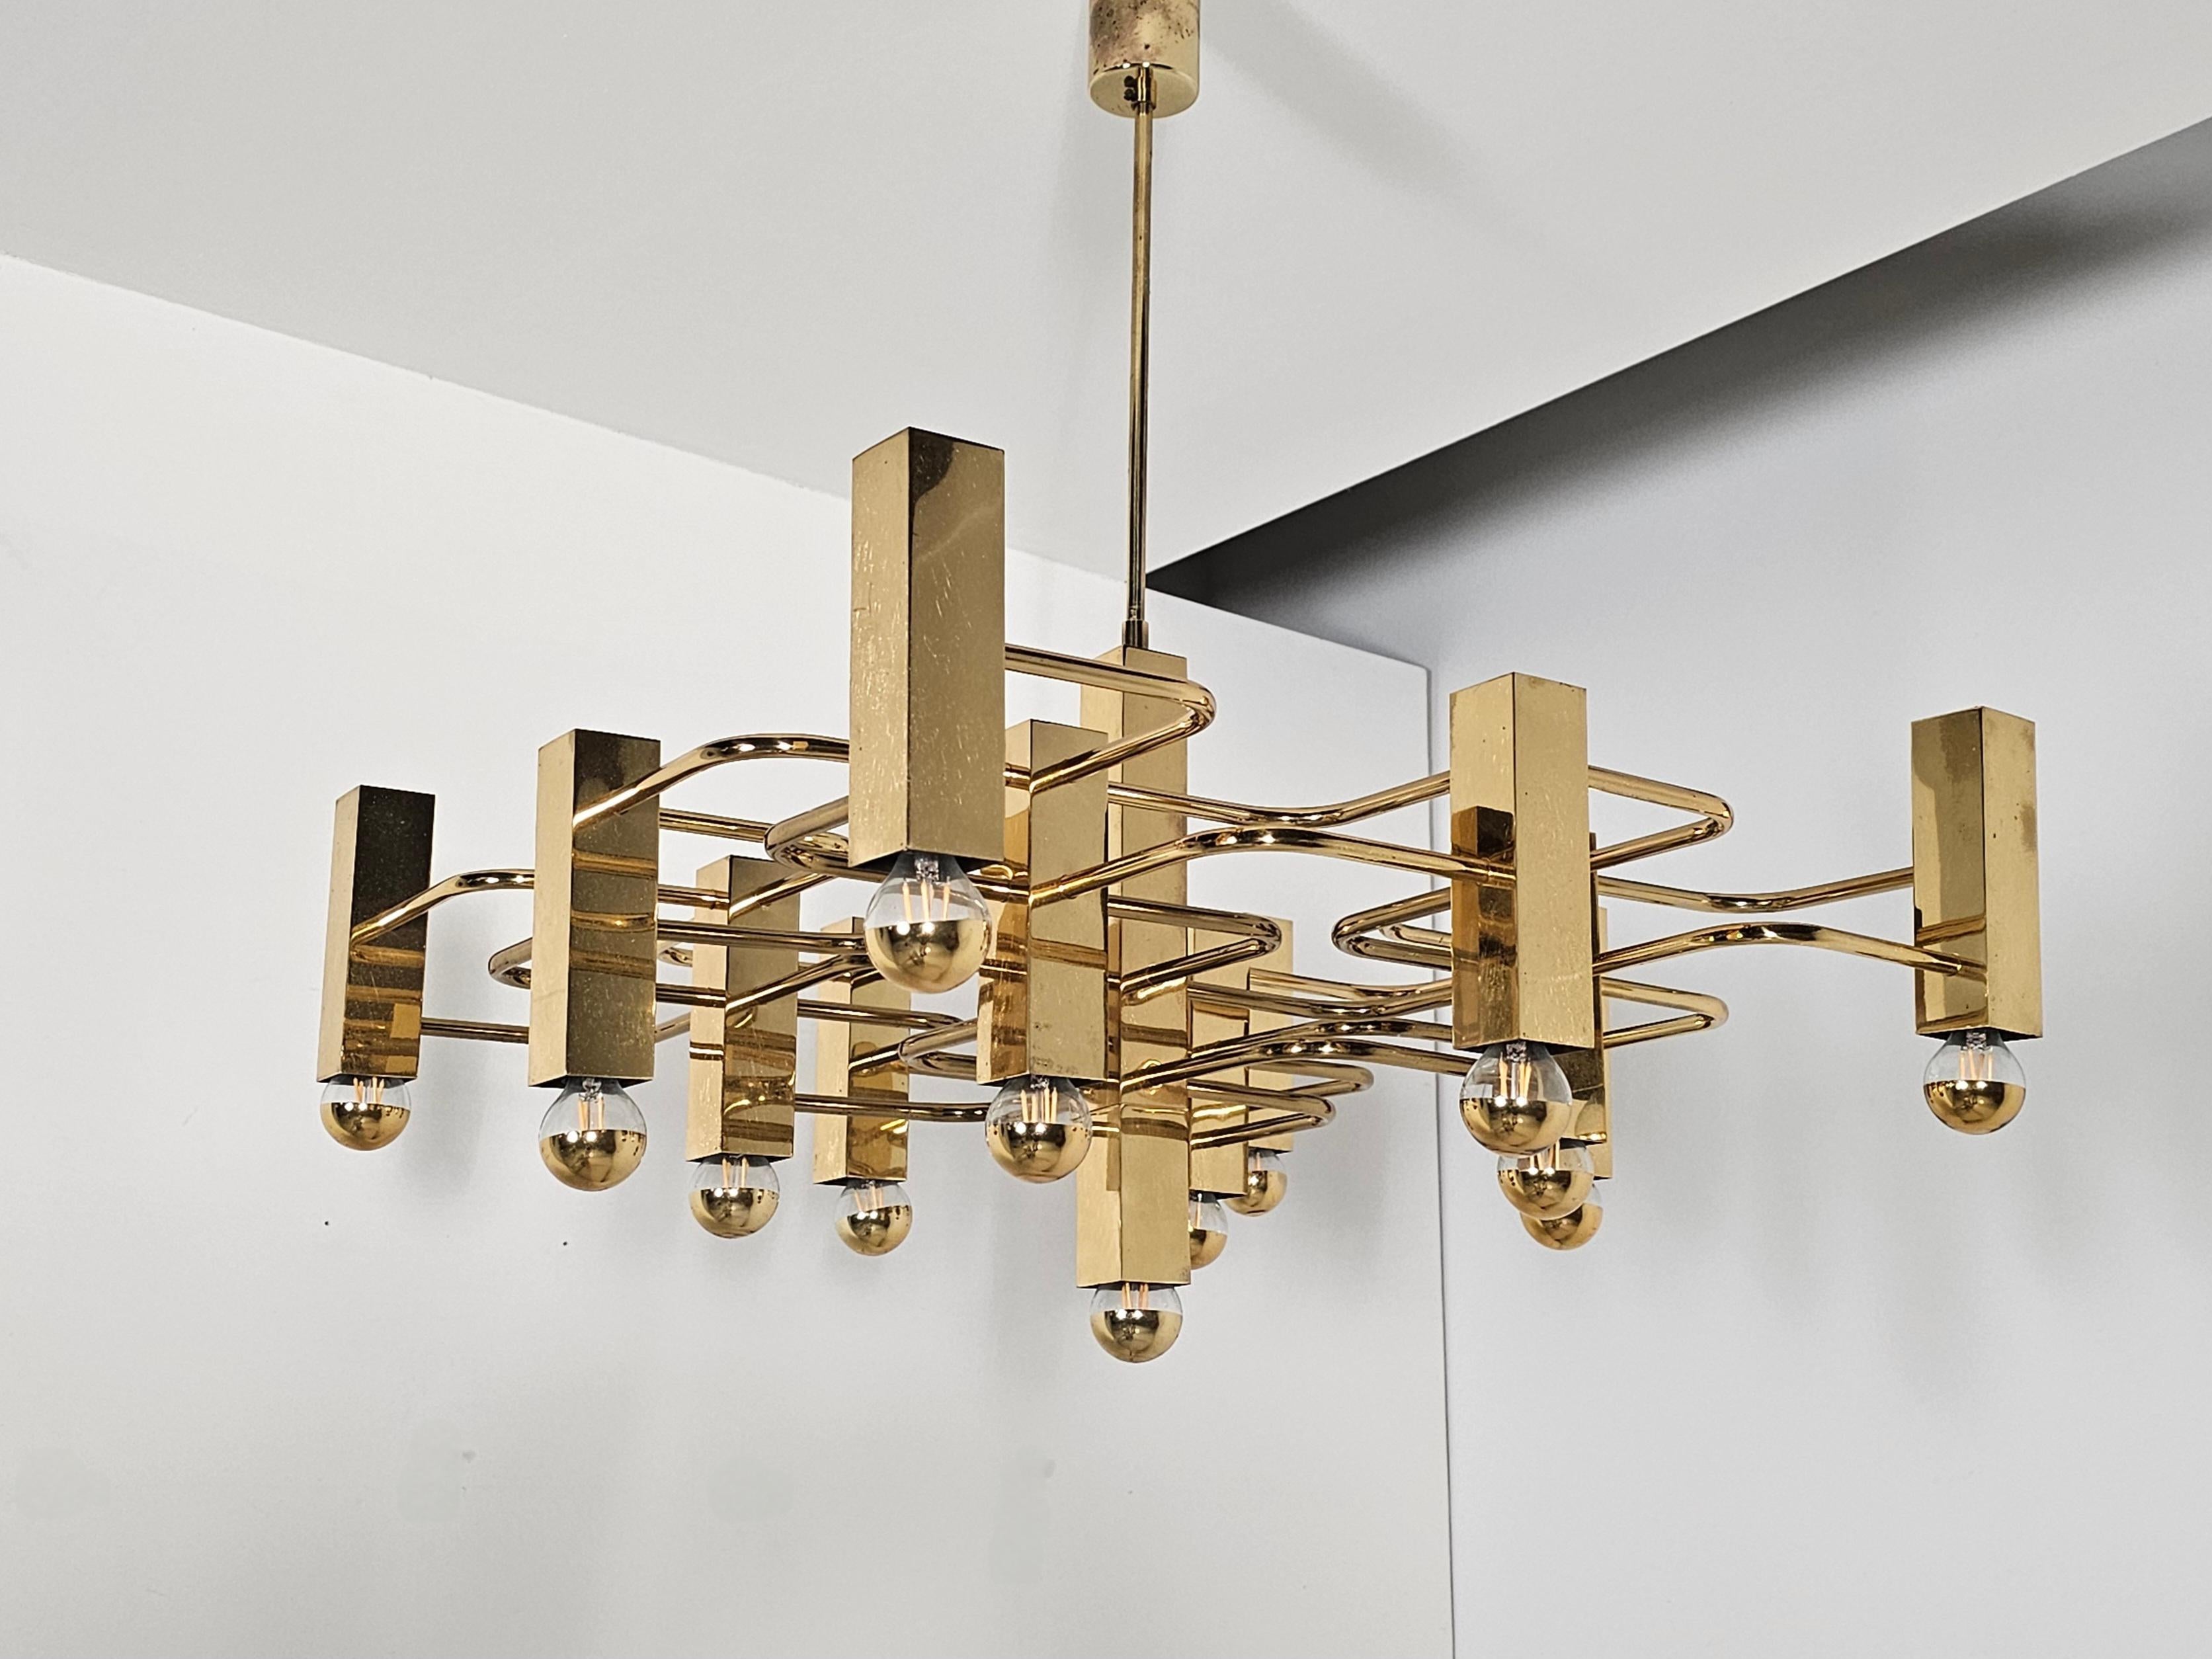 Large ceiling Lamp by Gaetano Sciolari for Belgian manufacturer S Boulanger, 1970s.

Imbued with timeless elegance this sculptural brass chandelier with 13 light fixtures, captivates sleek lines and beautiful details.

Comes with 13